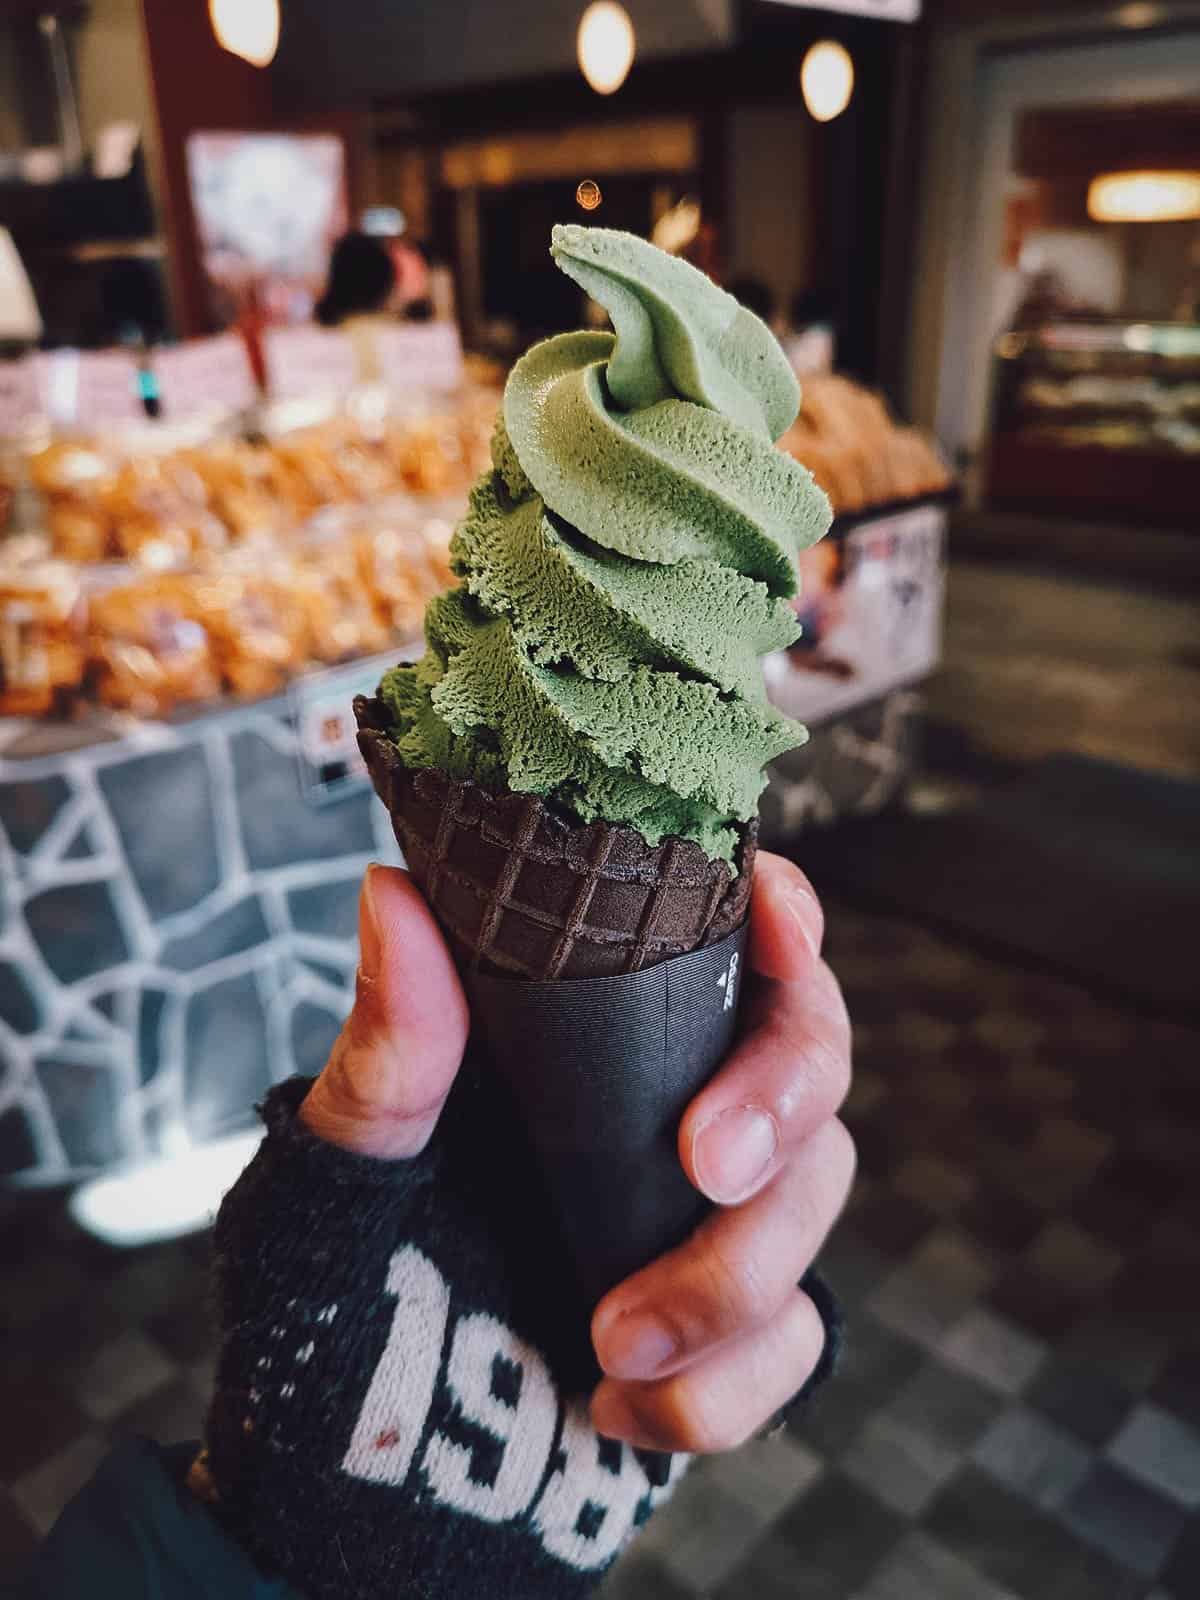 Matcha soft serve ice cream at a market in Kyoto